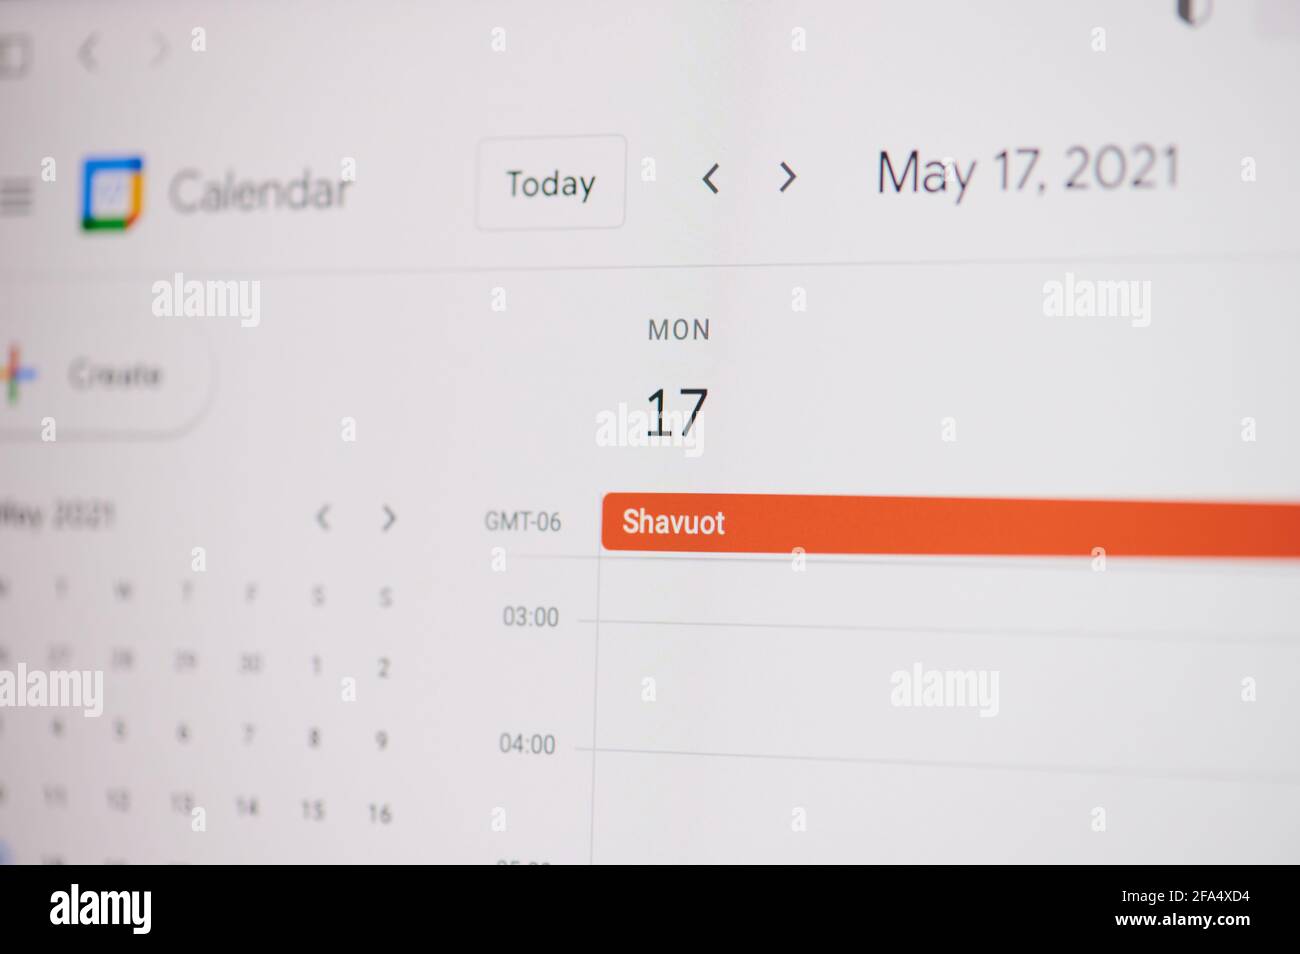 New york, USA - February 17, 2021: Shavuot 17 of may on google calendar on laptop screen close up view. Stock Photo